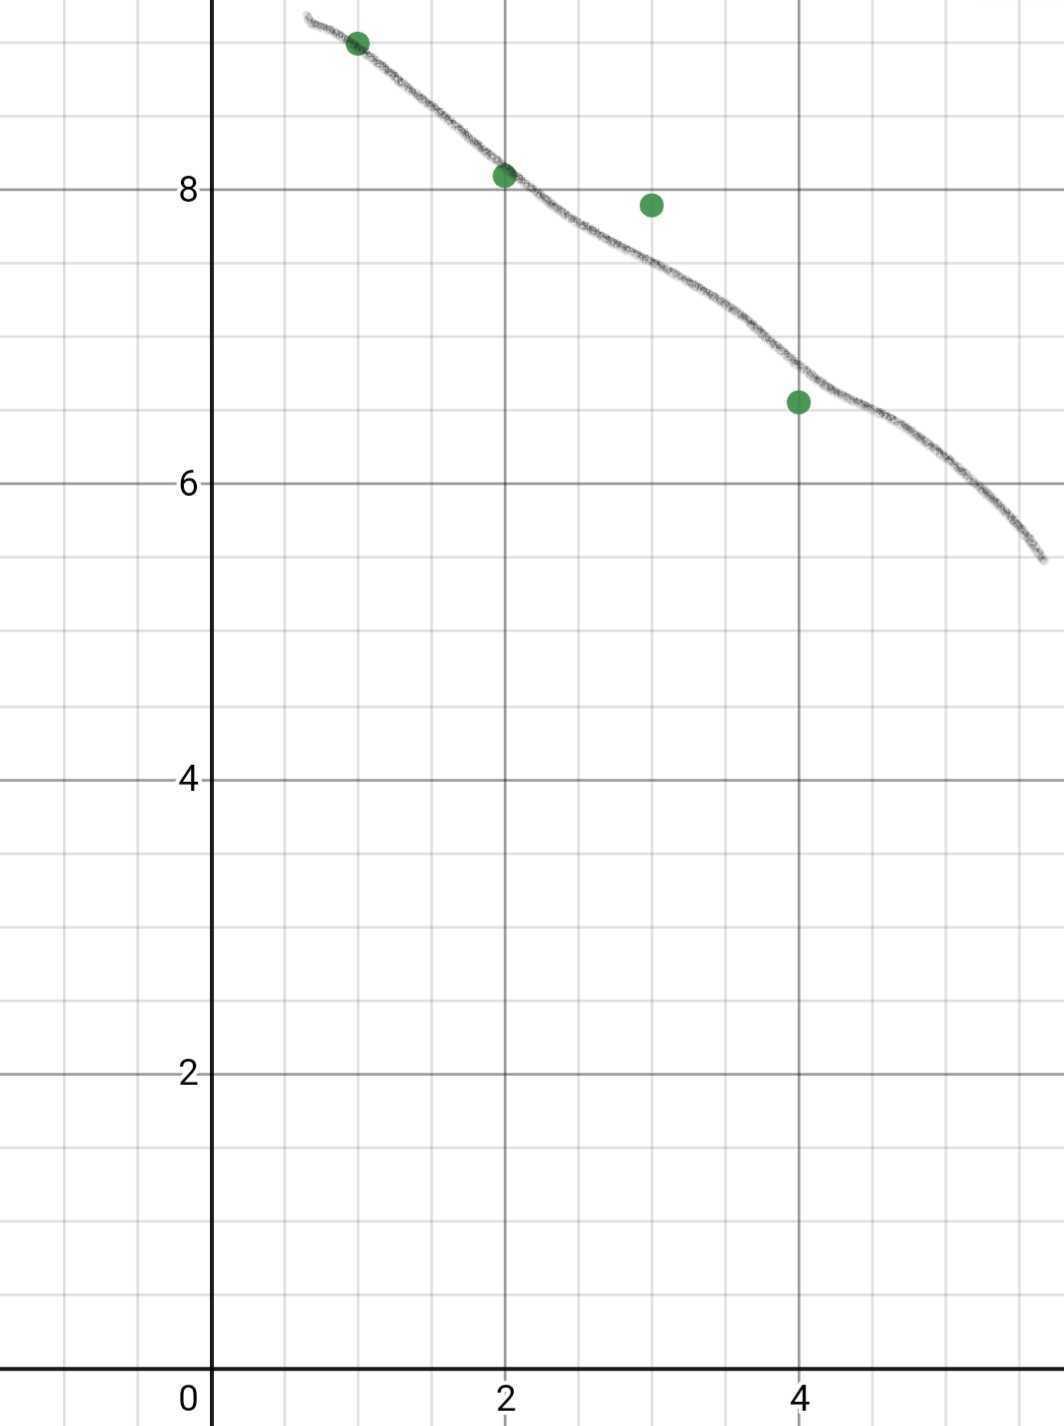 Let's Test Out The Prediction! On The Coordinate Plane Below, Plot The Points From Your Table In Slide